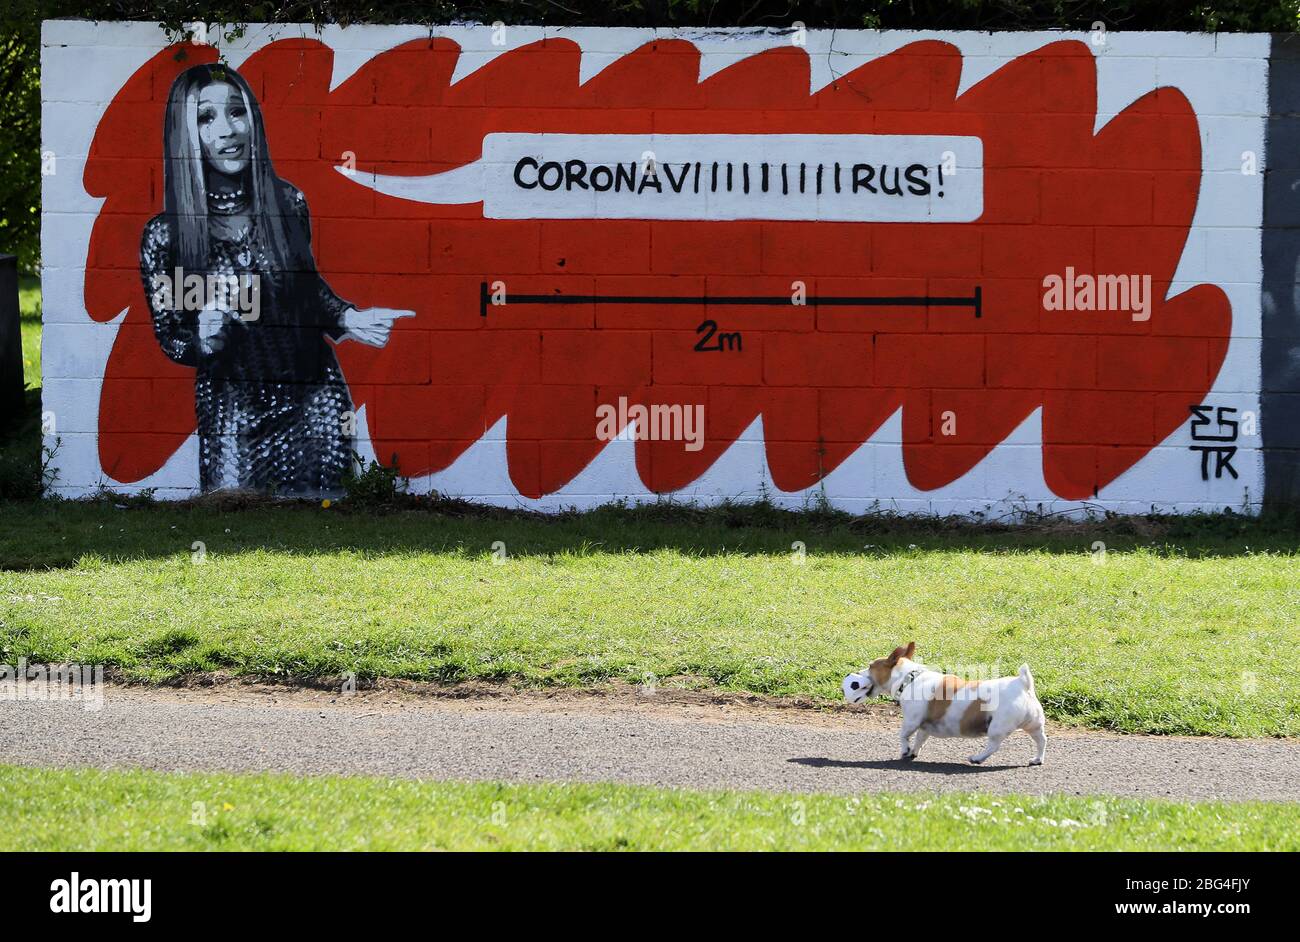 A dog passes a mural of artist Cardi B by Irish artist Emmalene Blake in a park in South Dublin. The Dublin artist has created a series of murals to encourage people to stick to social distancing rules which feature artists such as Dua Lipa, Robyn and Cardi B. Stock Photo